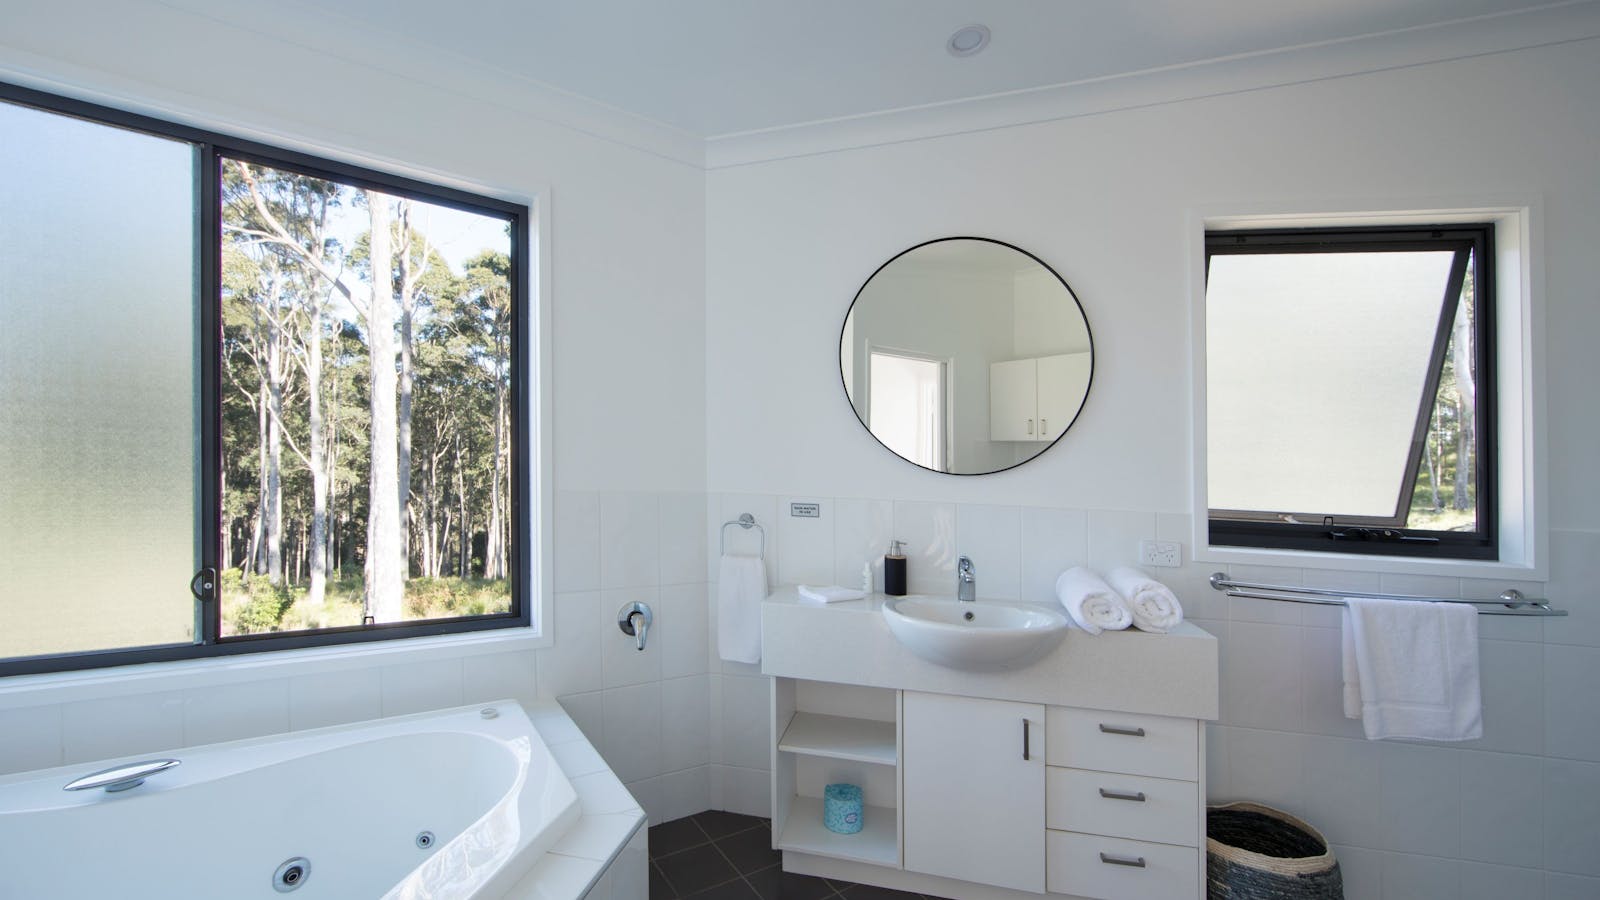 Modern bathroom with private, peaceful views